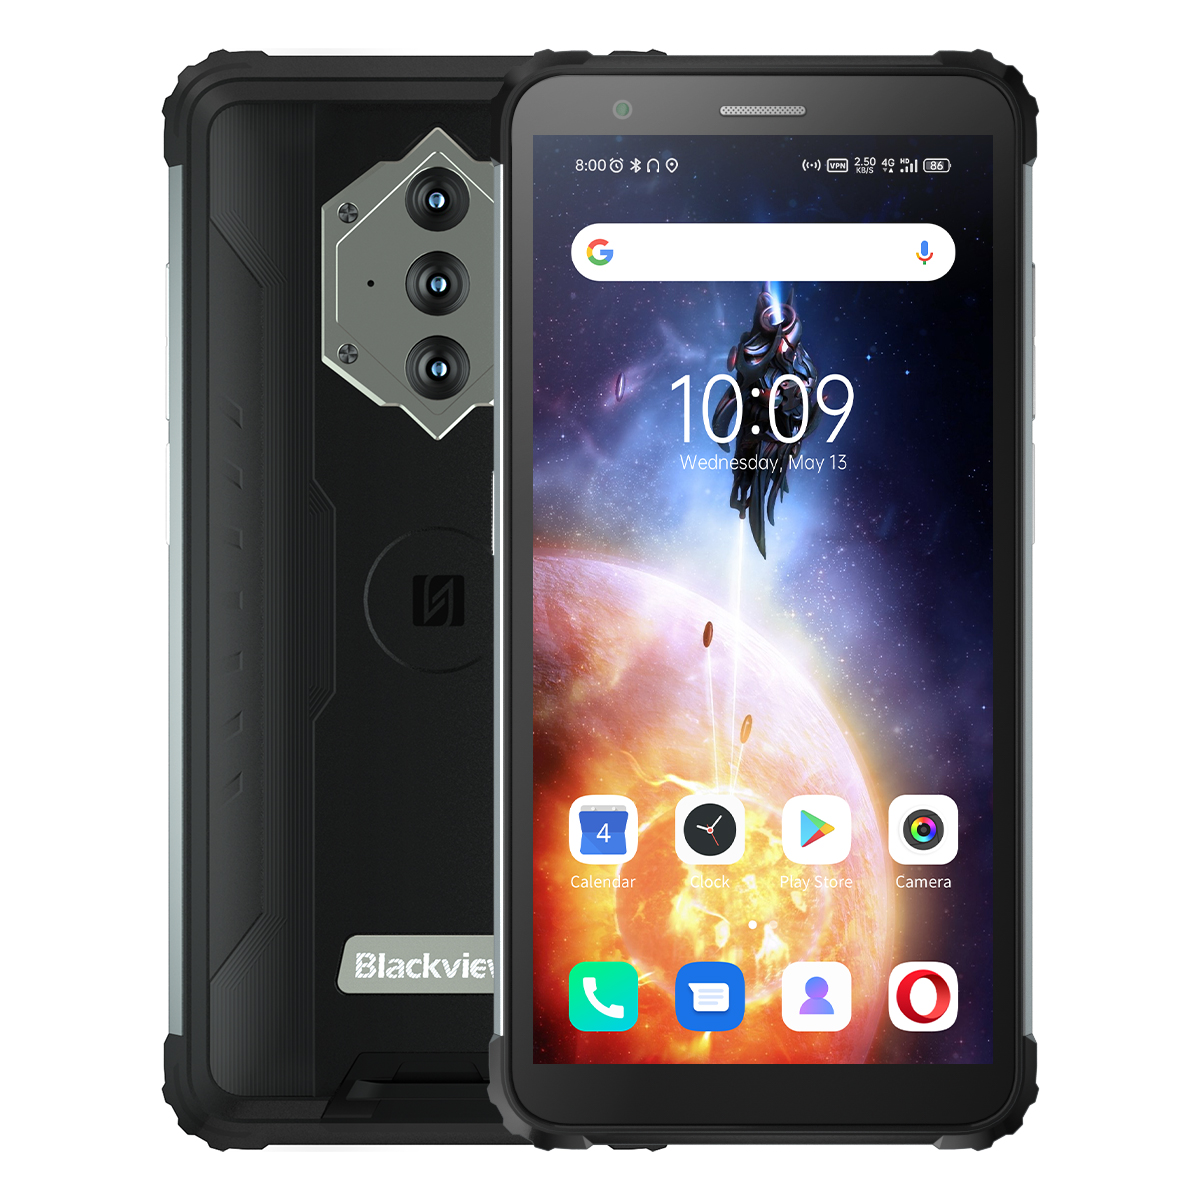 Find Blackview BV6600E Global Bands IP68 IP69K Waterproof Android 11 8580mAh 4GB 32GB SC9863A 5 7 inch Octa Core 4G Rugged Smartphone for Sale on Gipsybee.com with cryptocurrencies